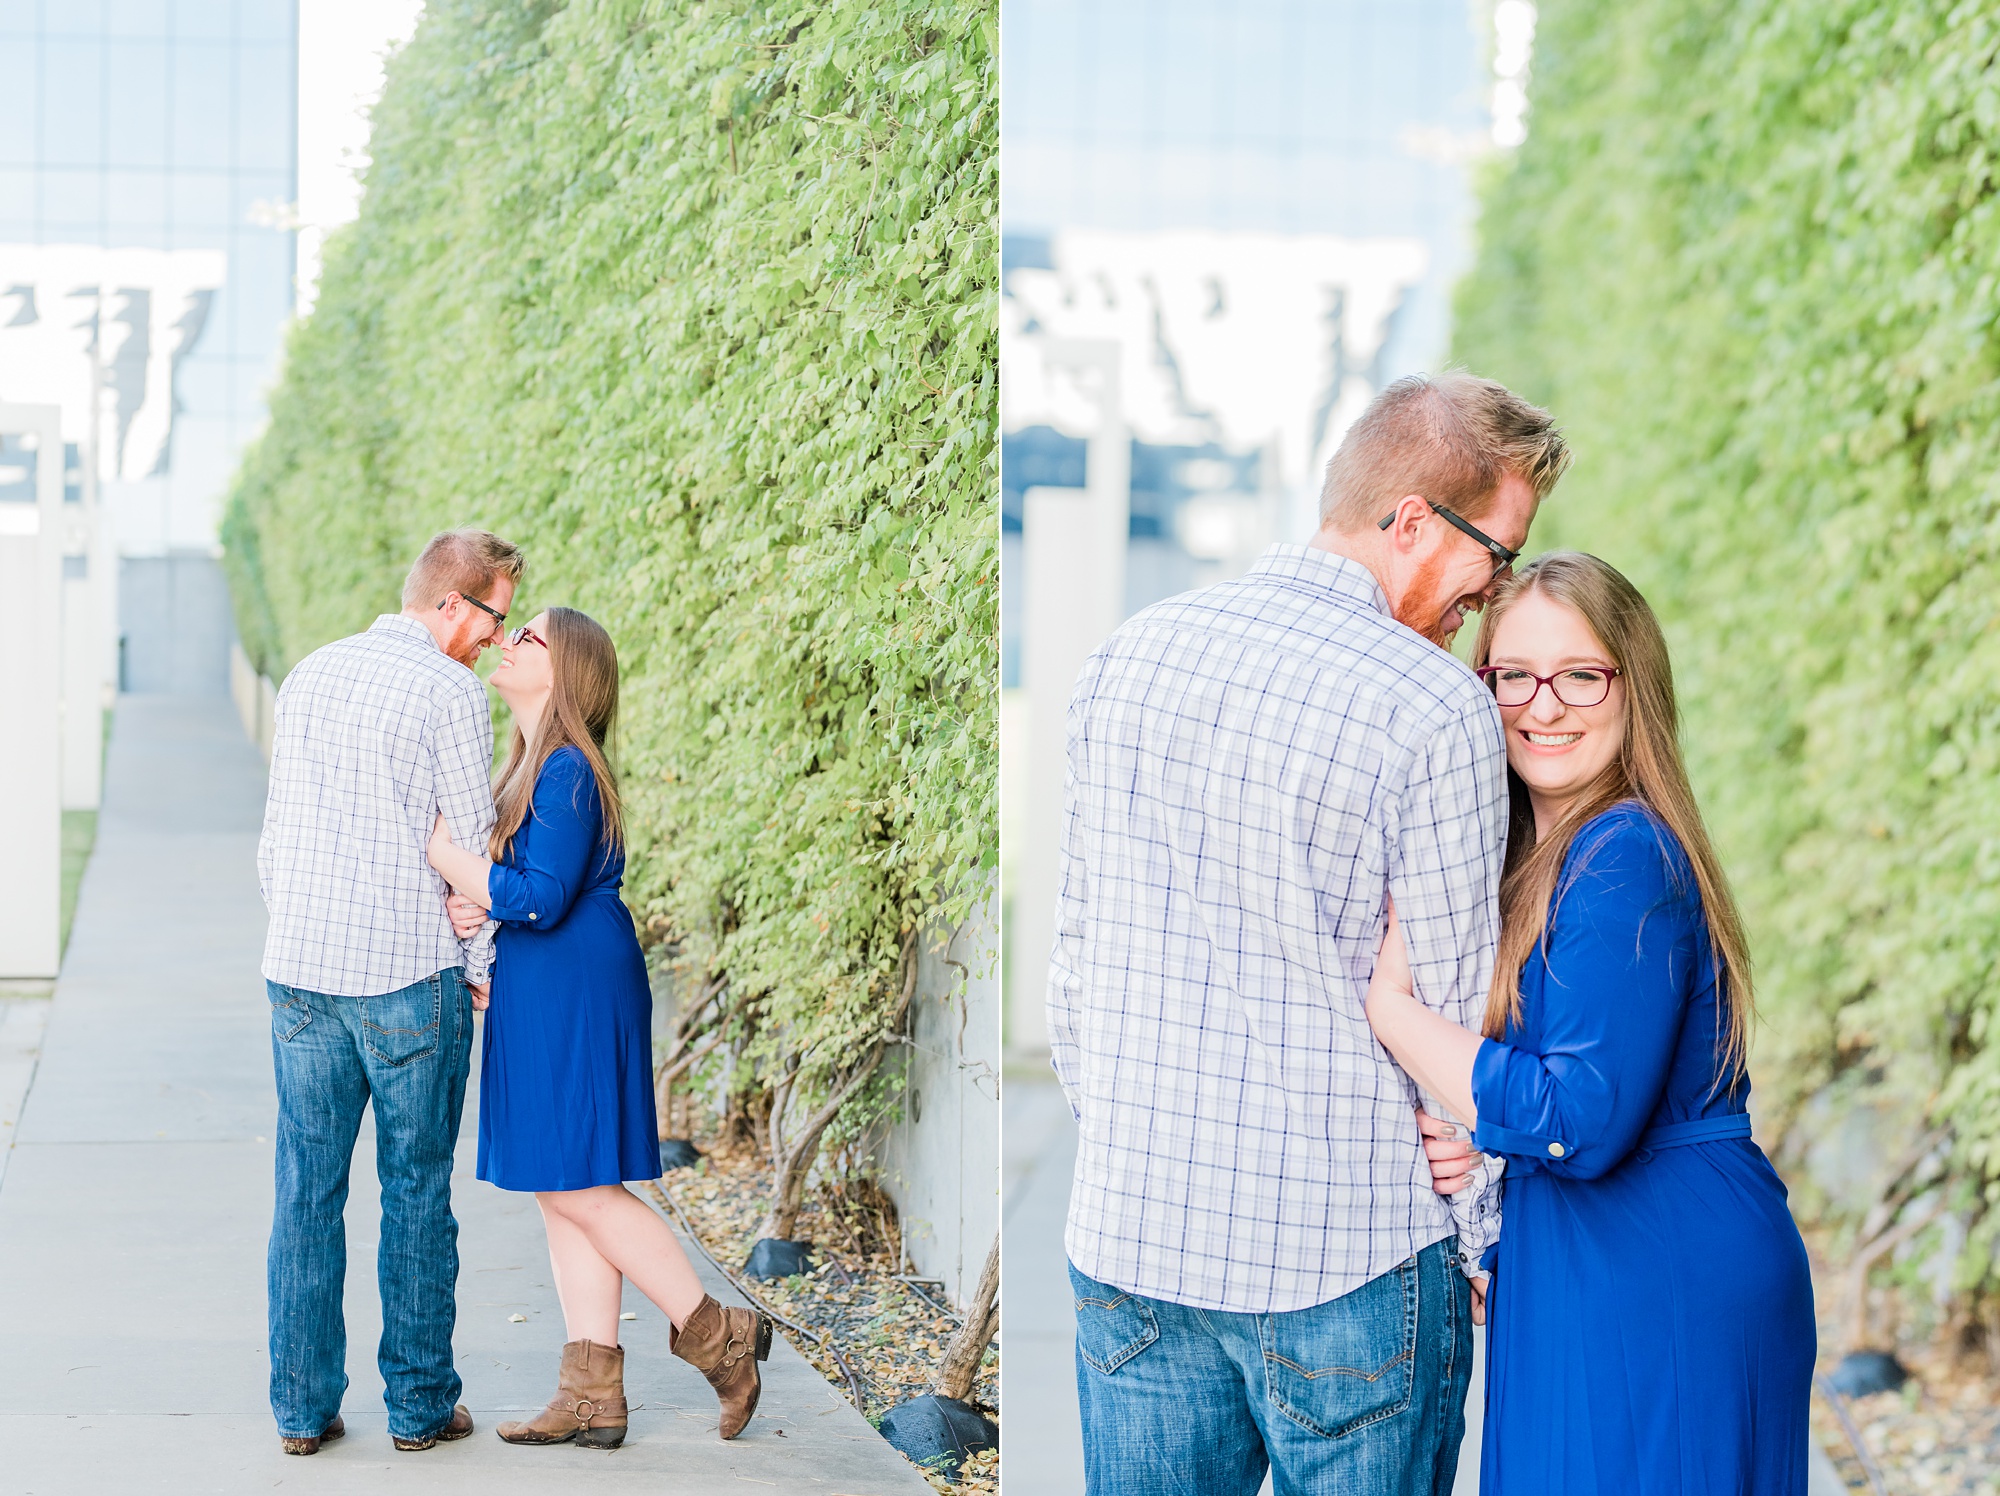 Winspear Opera House Engagement Session in Dallas